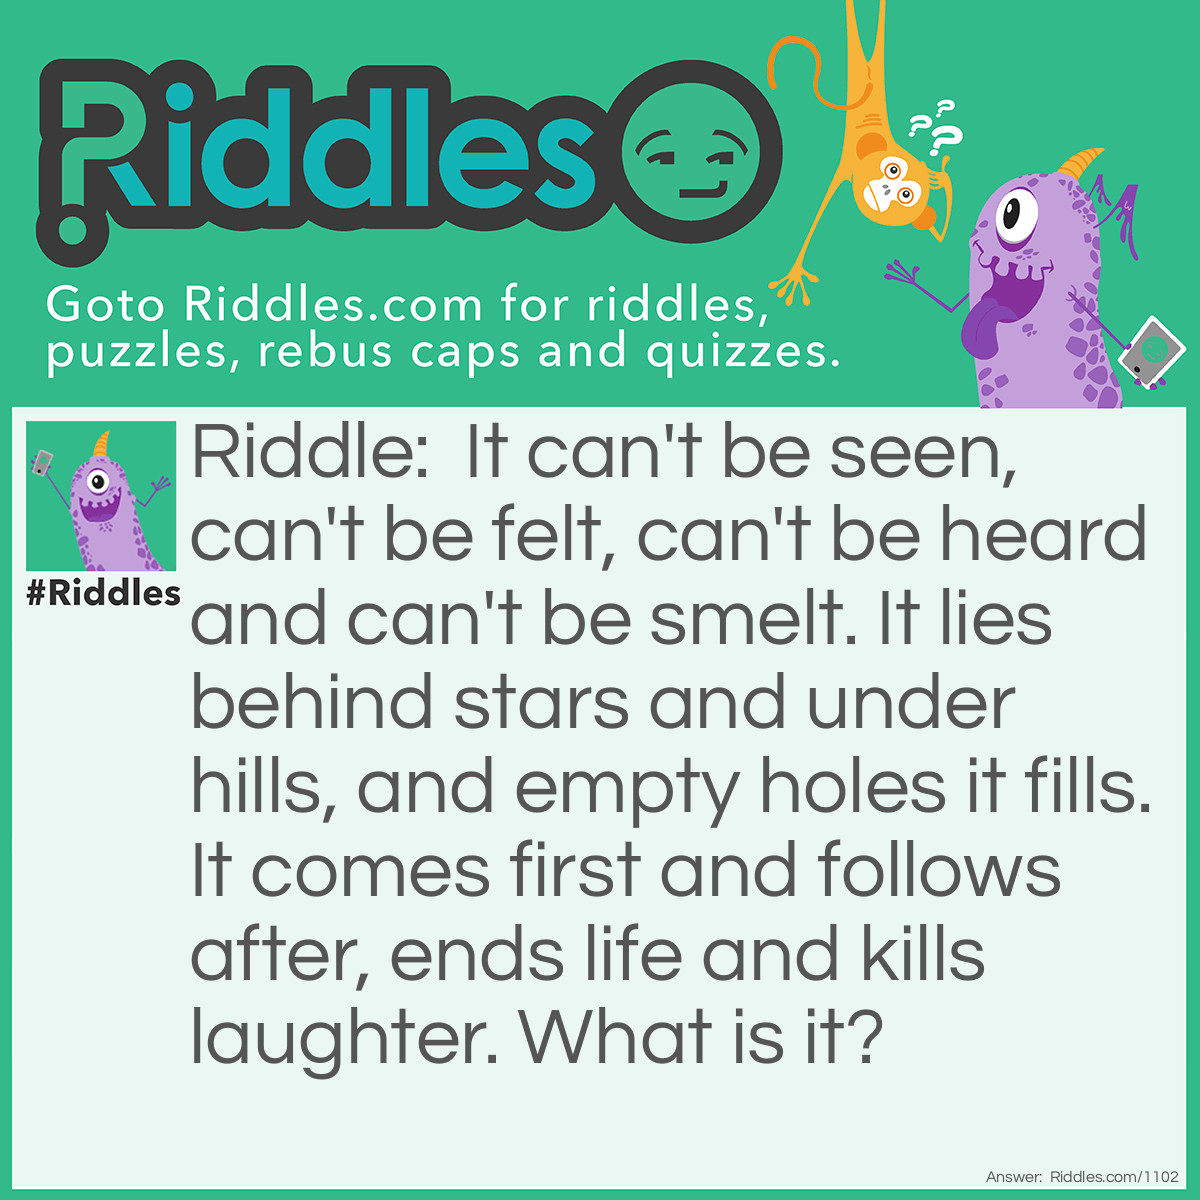 Riddle: It can't be seen, can't be felt, can't be heard, and can't be smelt. It lies behind stars and under hills, And empty holes it fills. It comes first and follows after, Ends life, and kills <a href="/funny-riddles">laughter</a>. What is it? Answer: The dark.